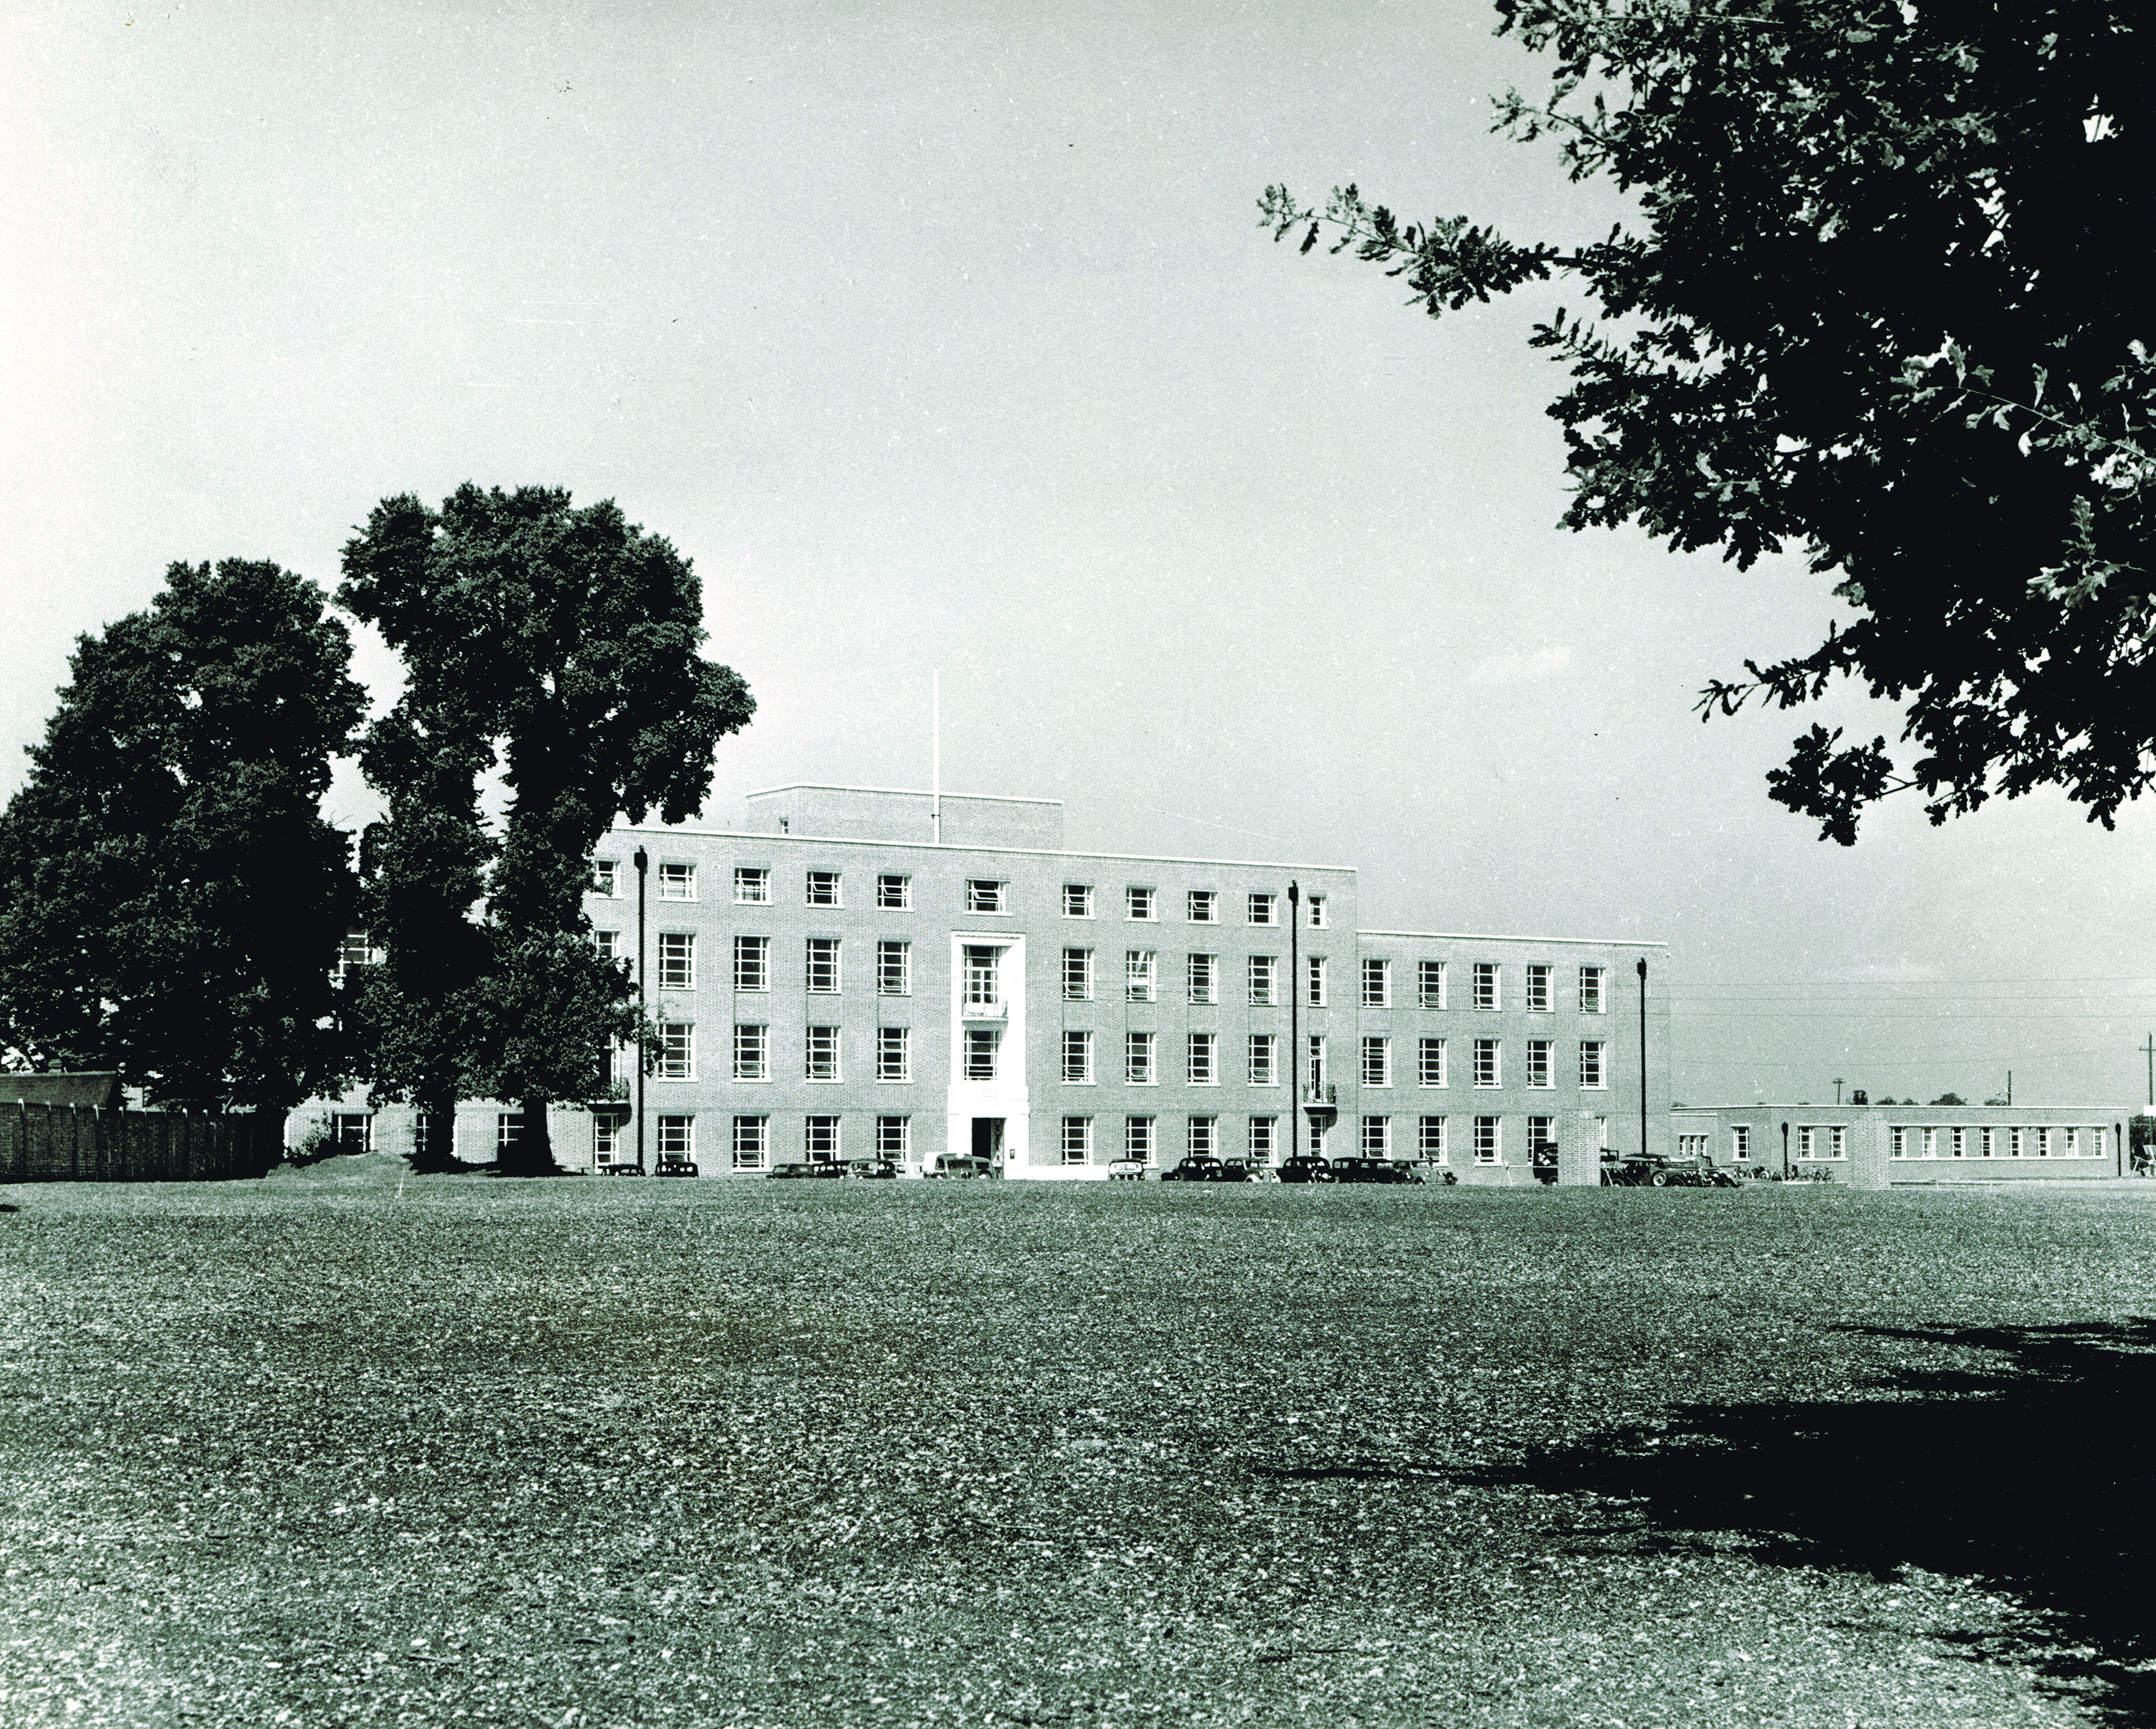 Fawley Administration Building 1950s